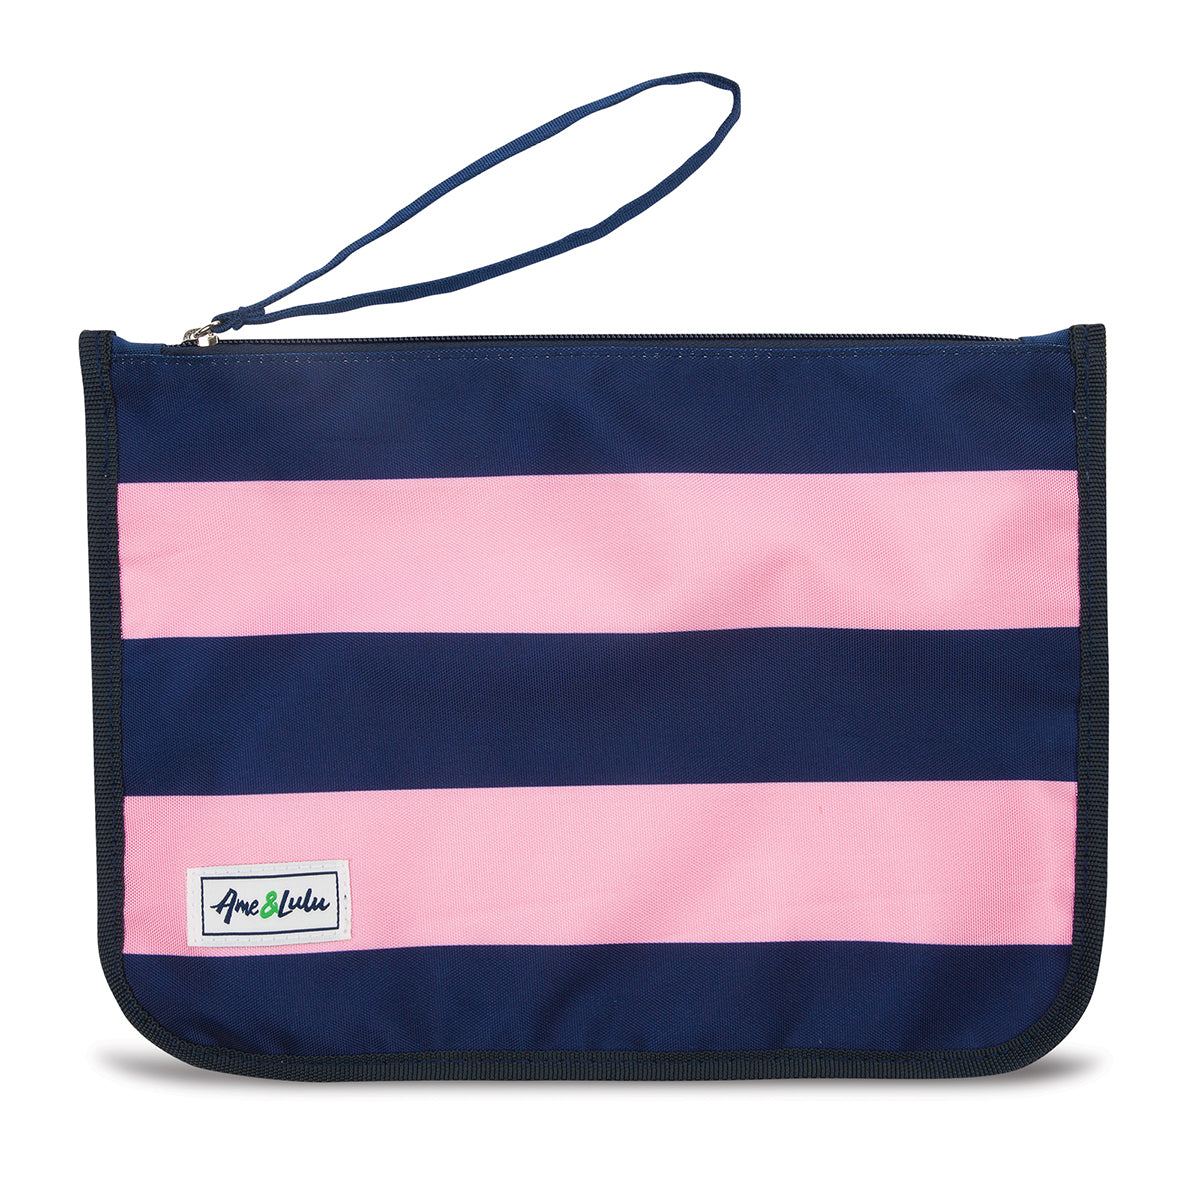 navy and pink striped nylon zip pouch with wrist strap